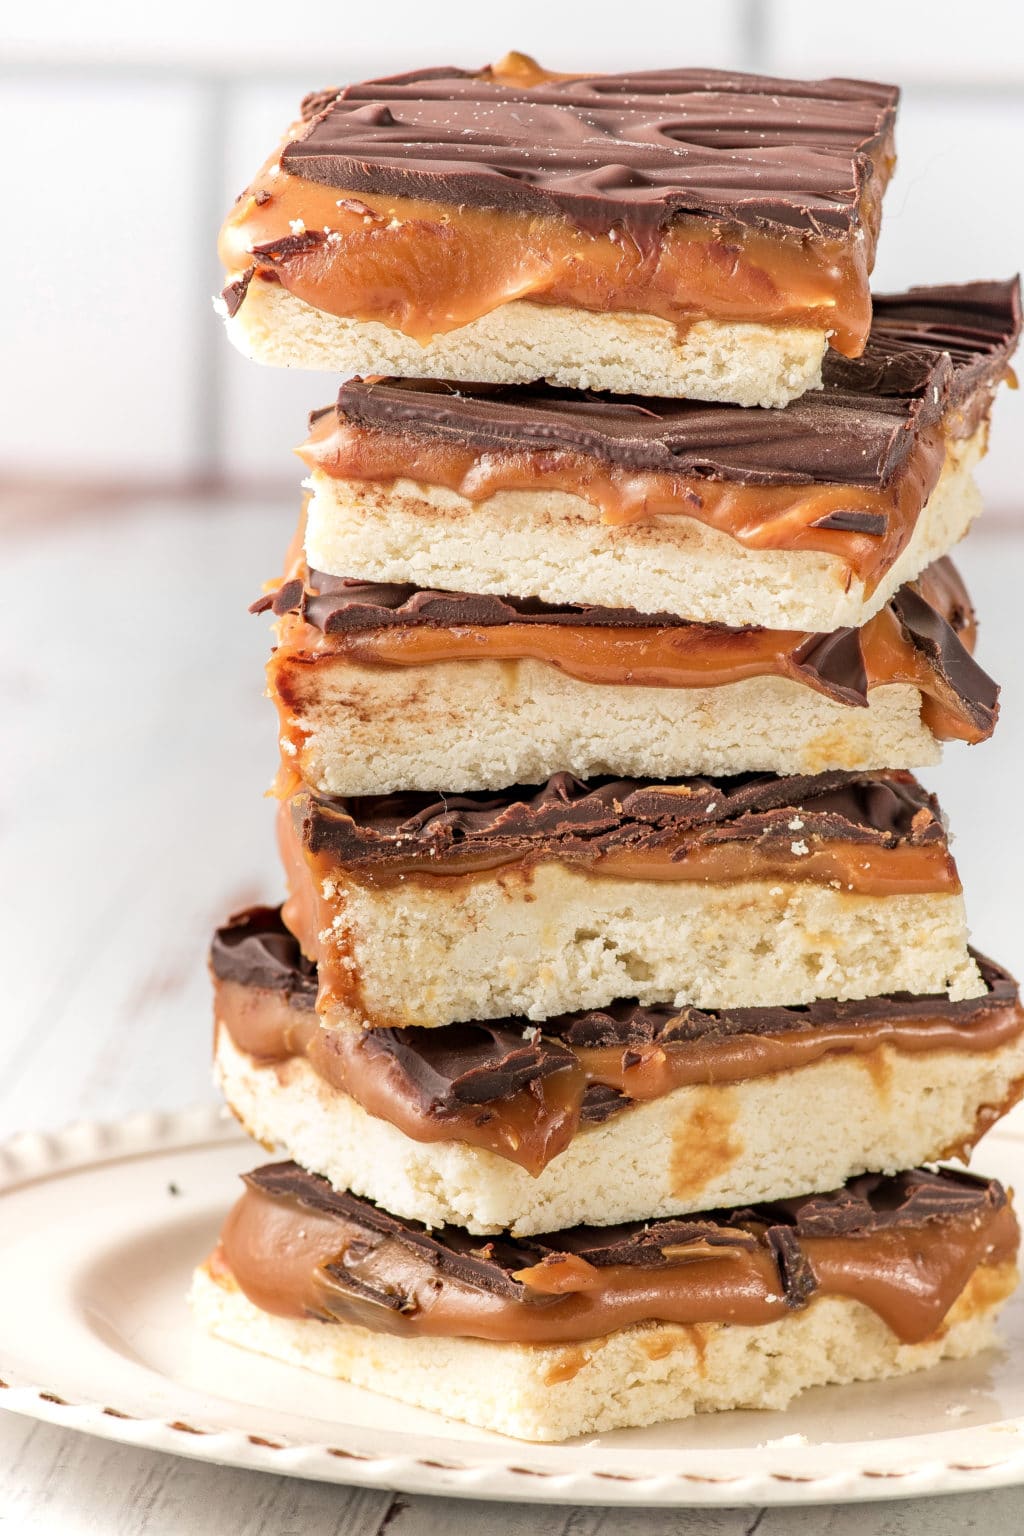 A stack of keto-friendly millionaire bars stacked on a white plate